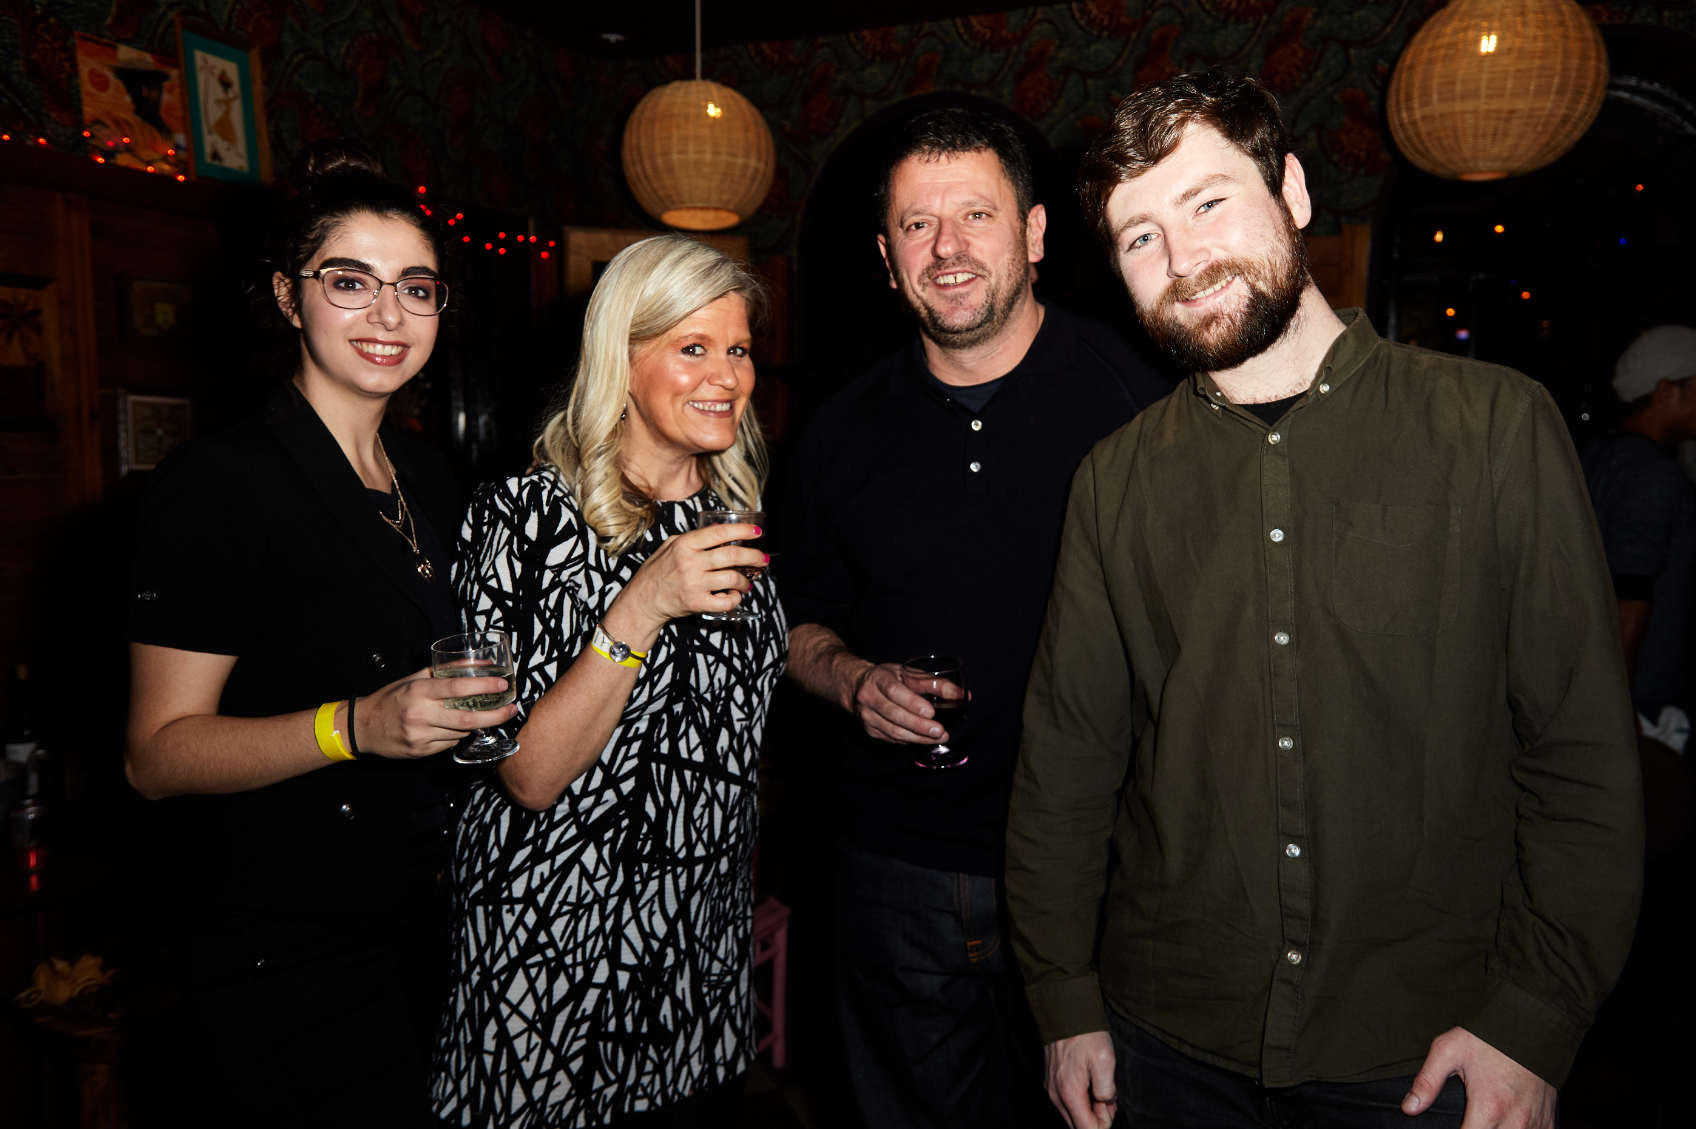 Here’s What Happened At The Immortal Awards x Wave Studios NY Welcome Drink Reception